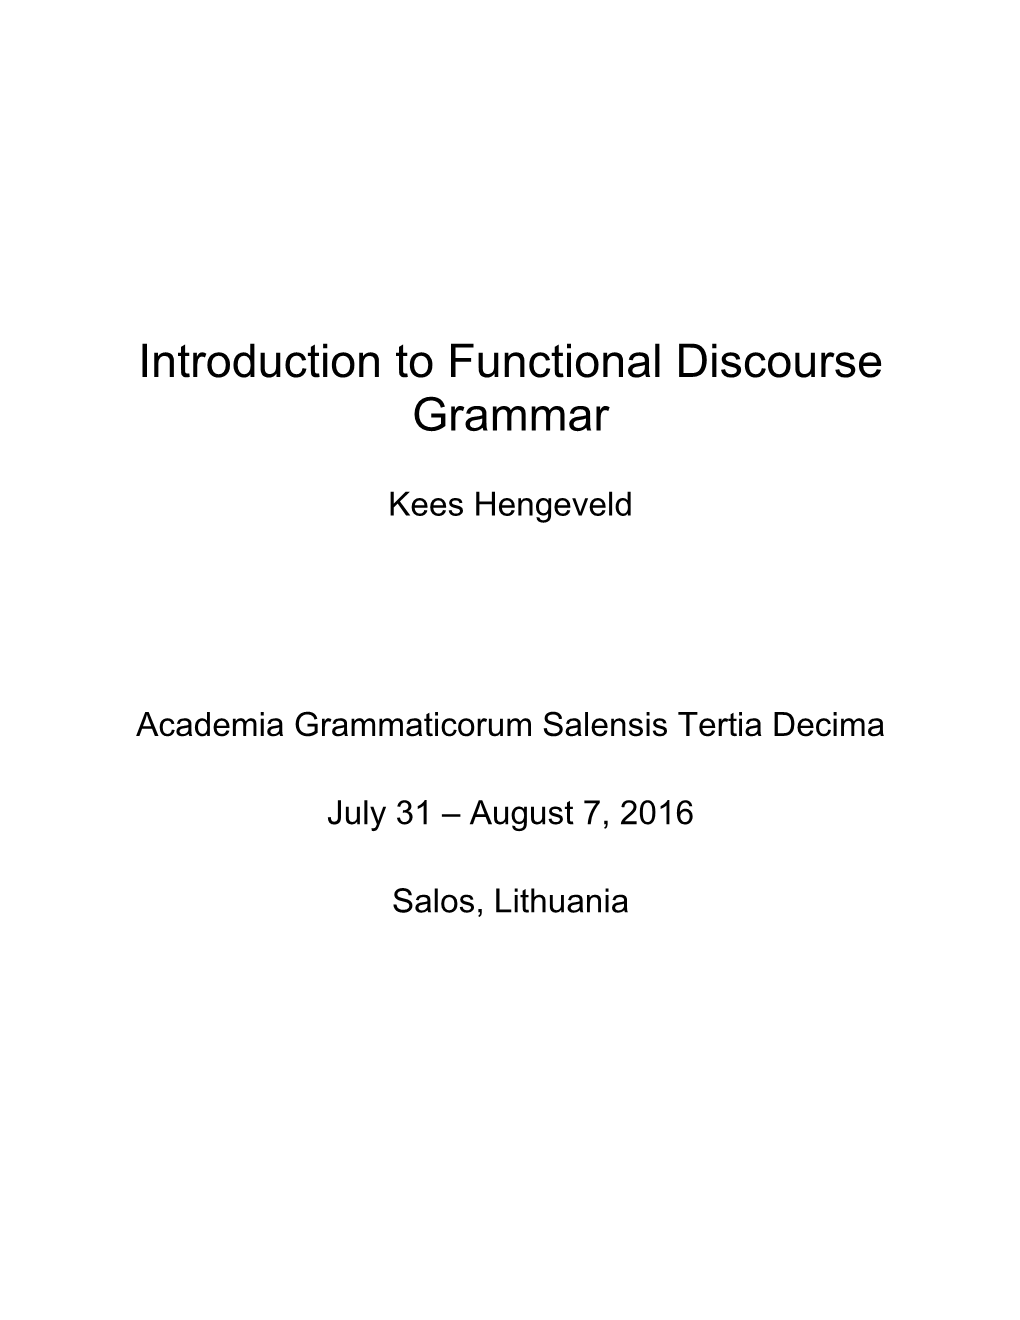 Introduction to Functional Discourse Grammar